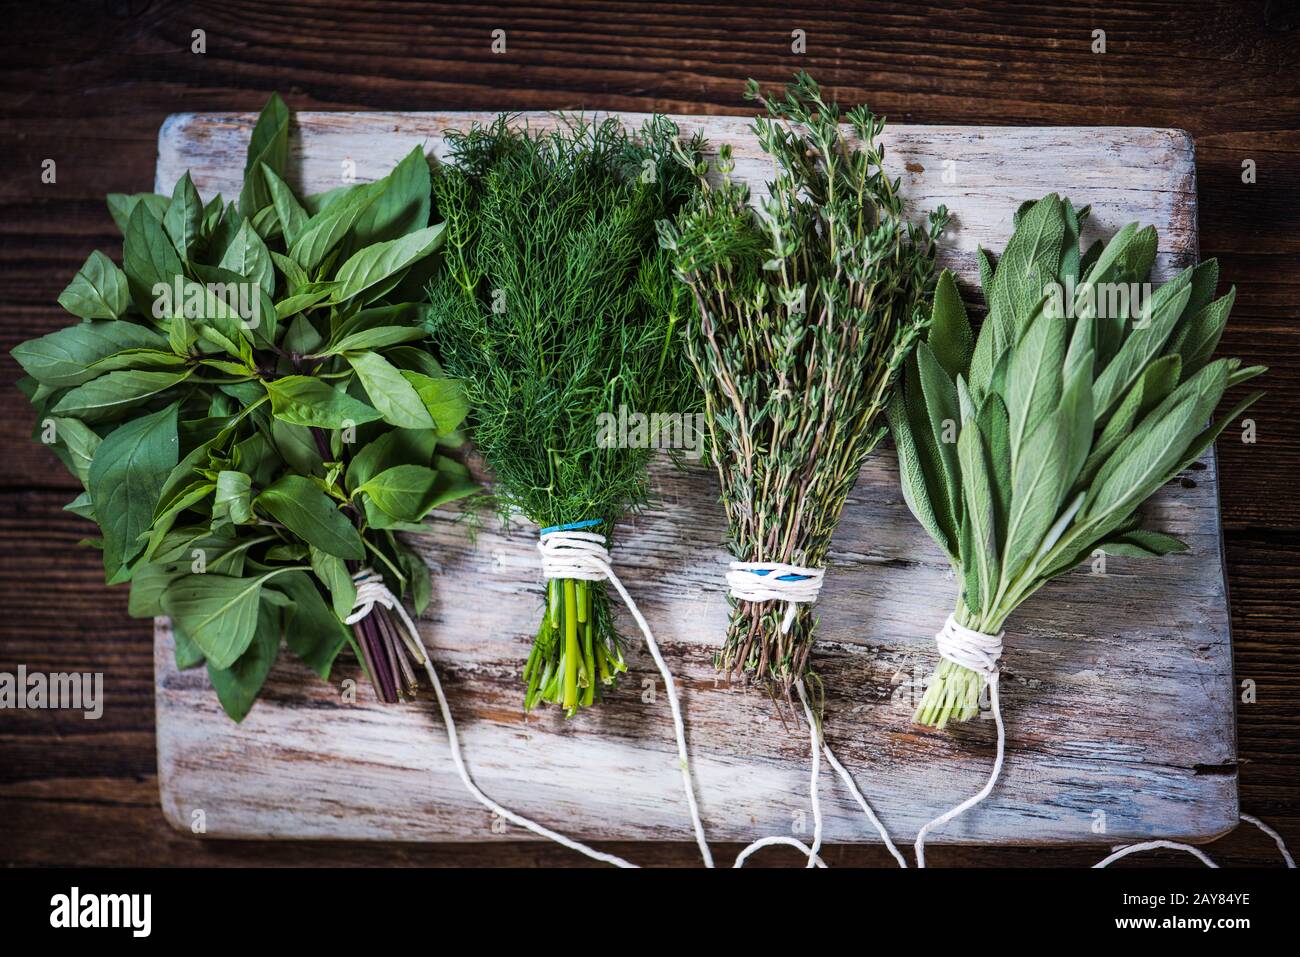 Basil,sage,dill,and thyme herbs Stock Photo